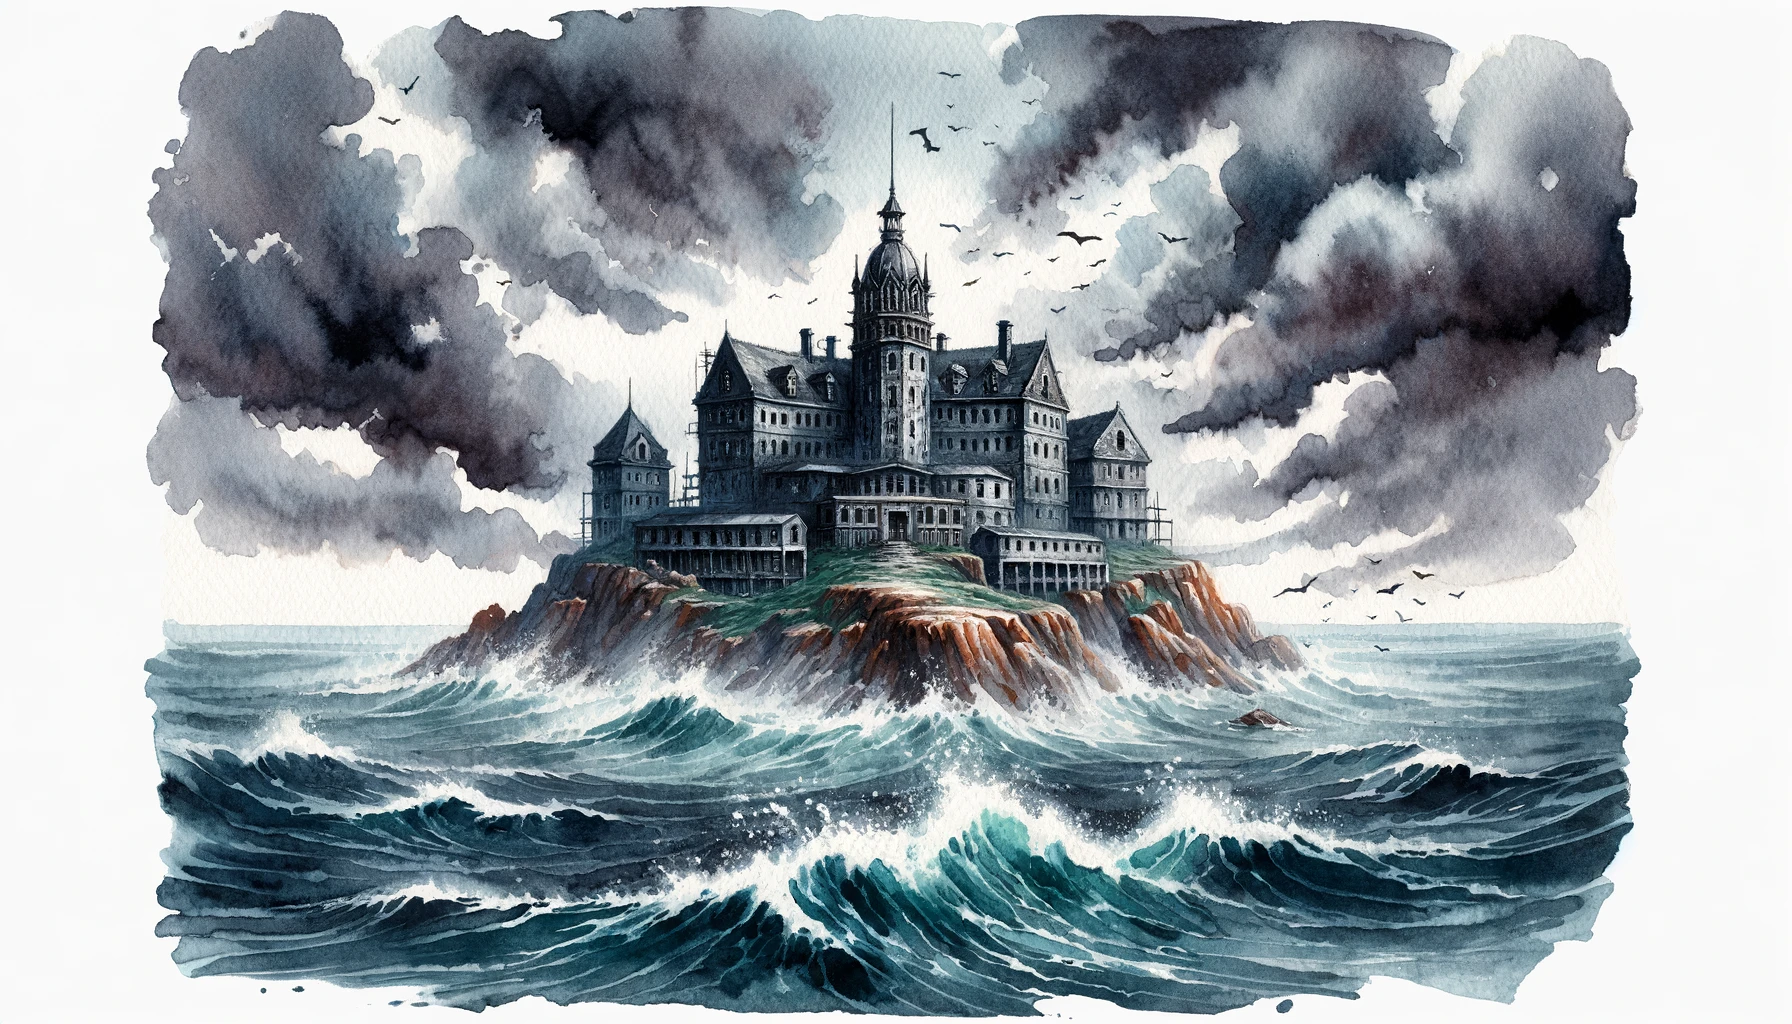 Cover image for movies like Shutter Island blog post - features a creepy island surrounded by wild ocean.